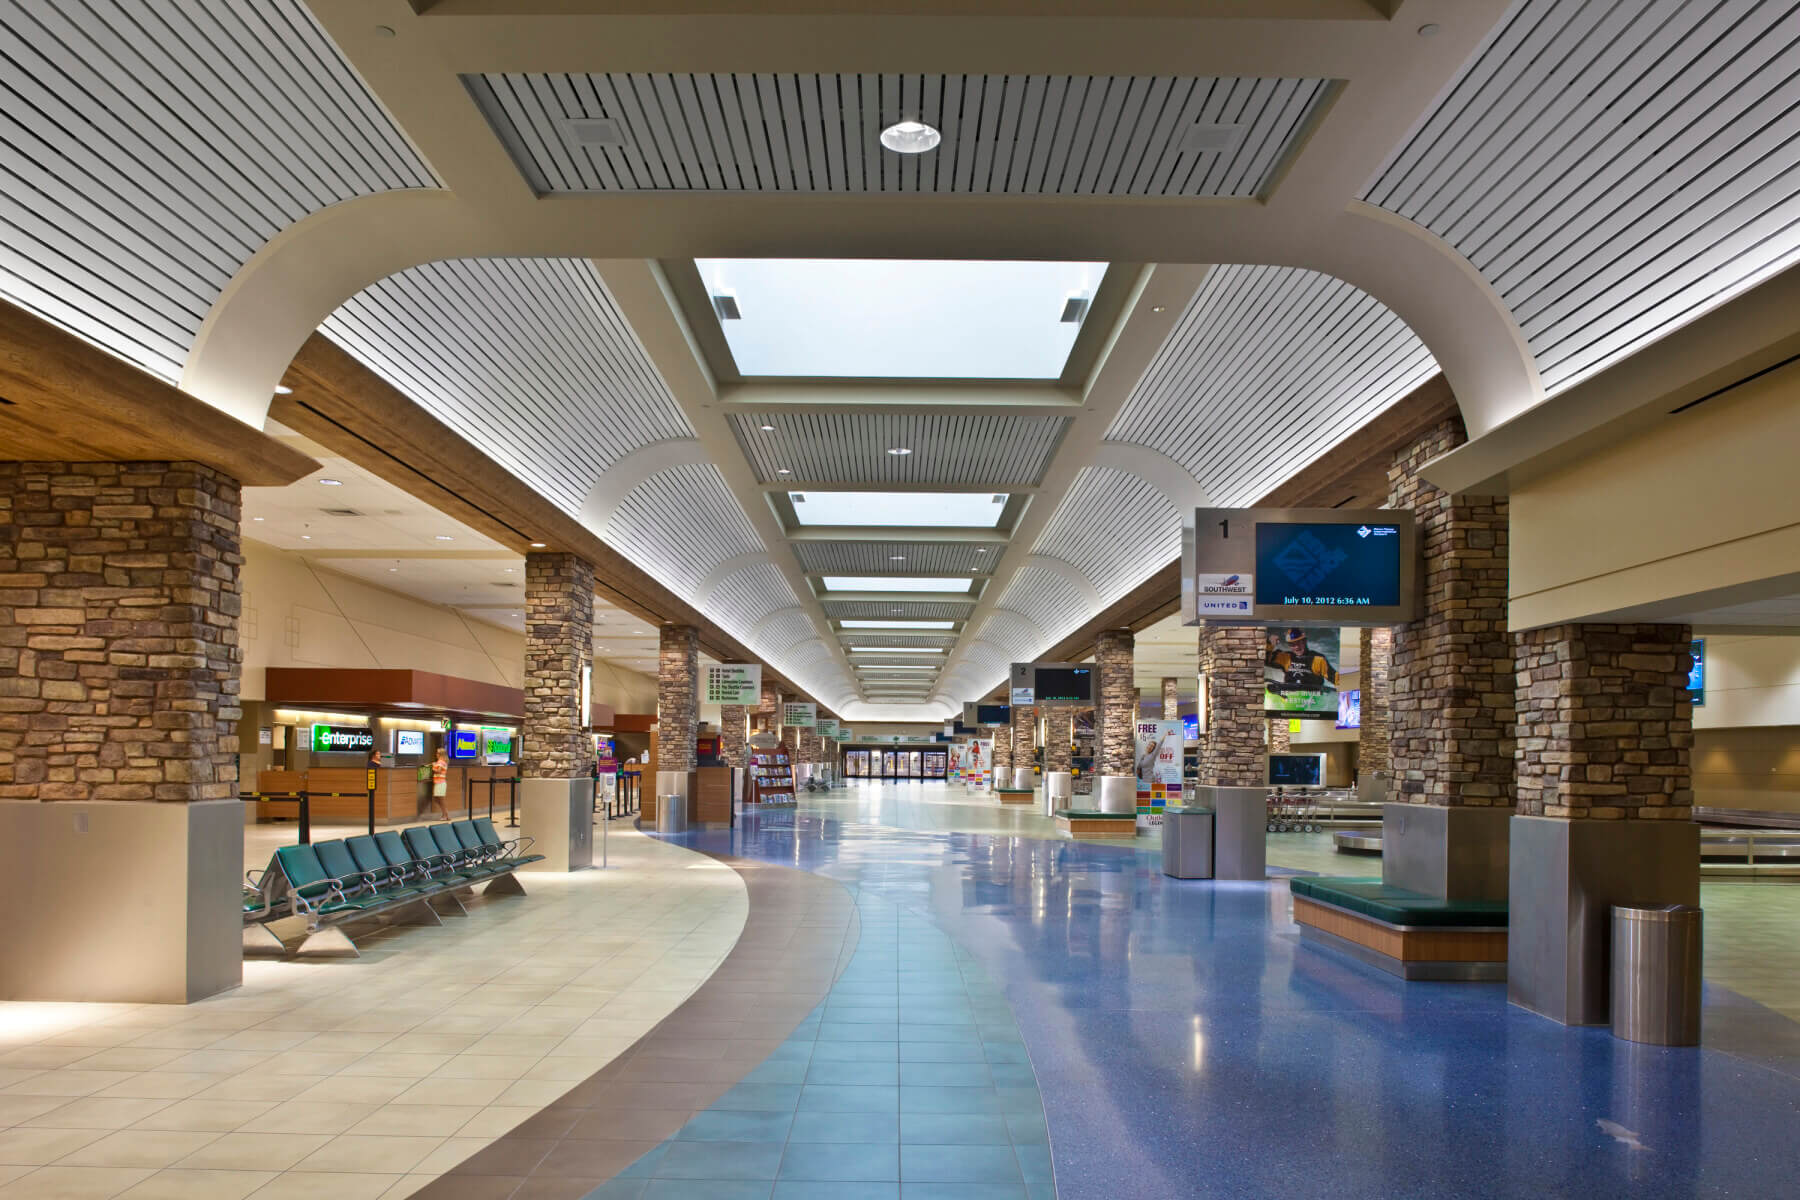 : the concourse inside Reno Tahoe International Airport